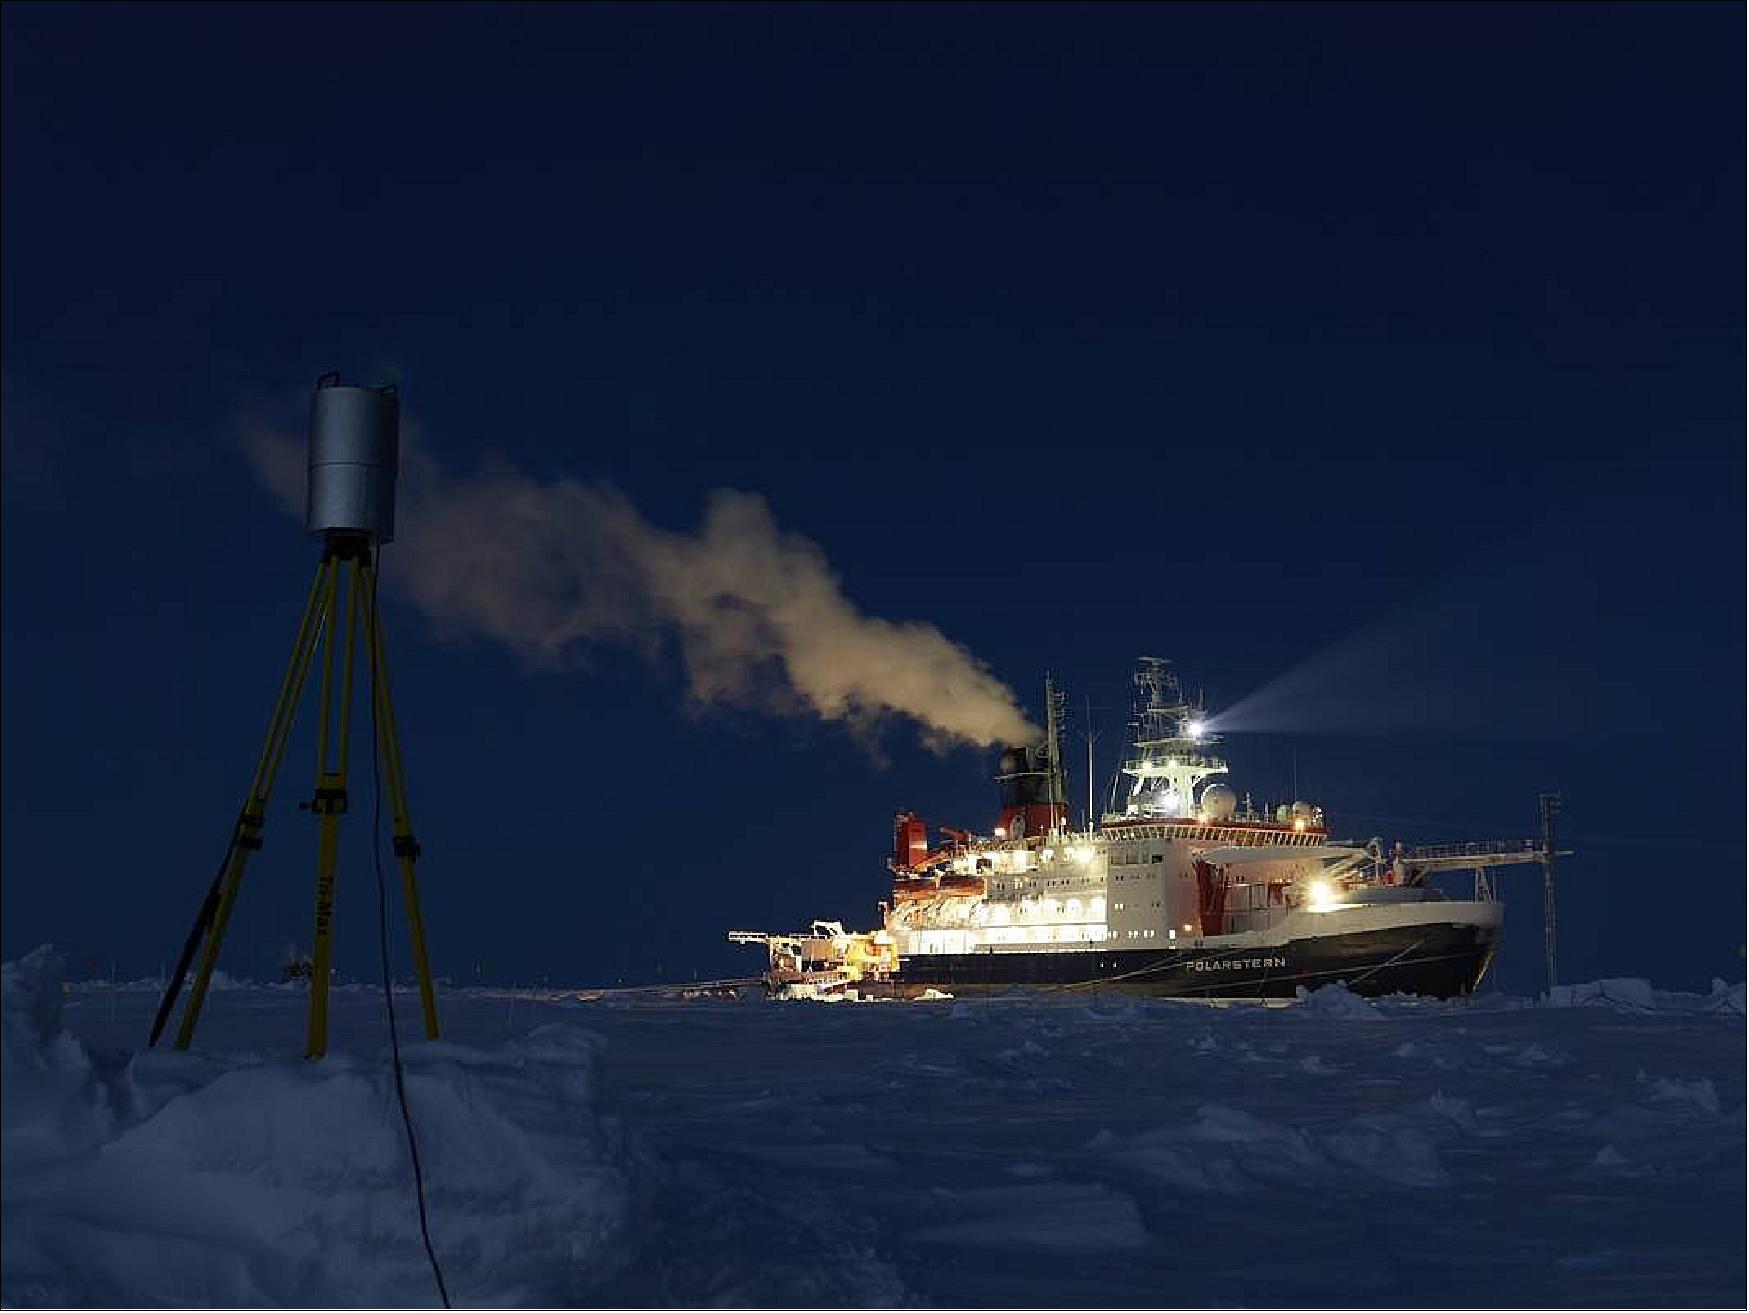 Figure 9: The terrestrial laser scanner (TLS) creates 3D laser scans of the land-/snowscape on the MOSAiC ice floe. The scans allow investigating changes in ice and snow conditions by measuring e.g. wind driven height changes of the snow or ridge formation of the ice (photo credit: Matthias Jaggi)